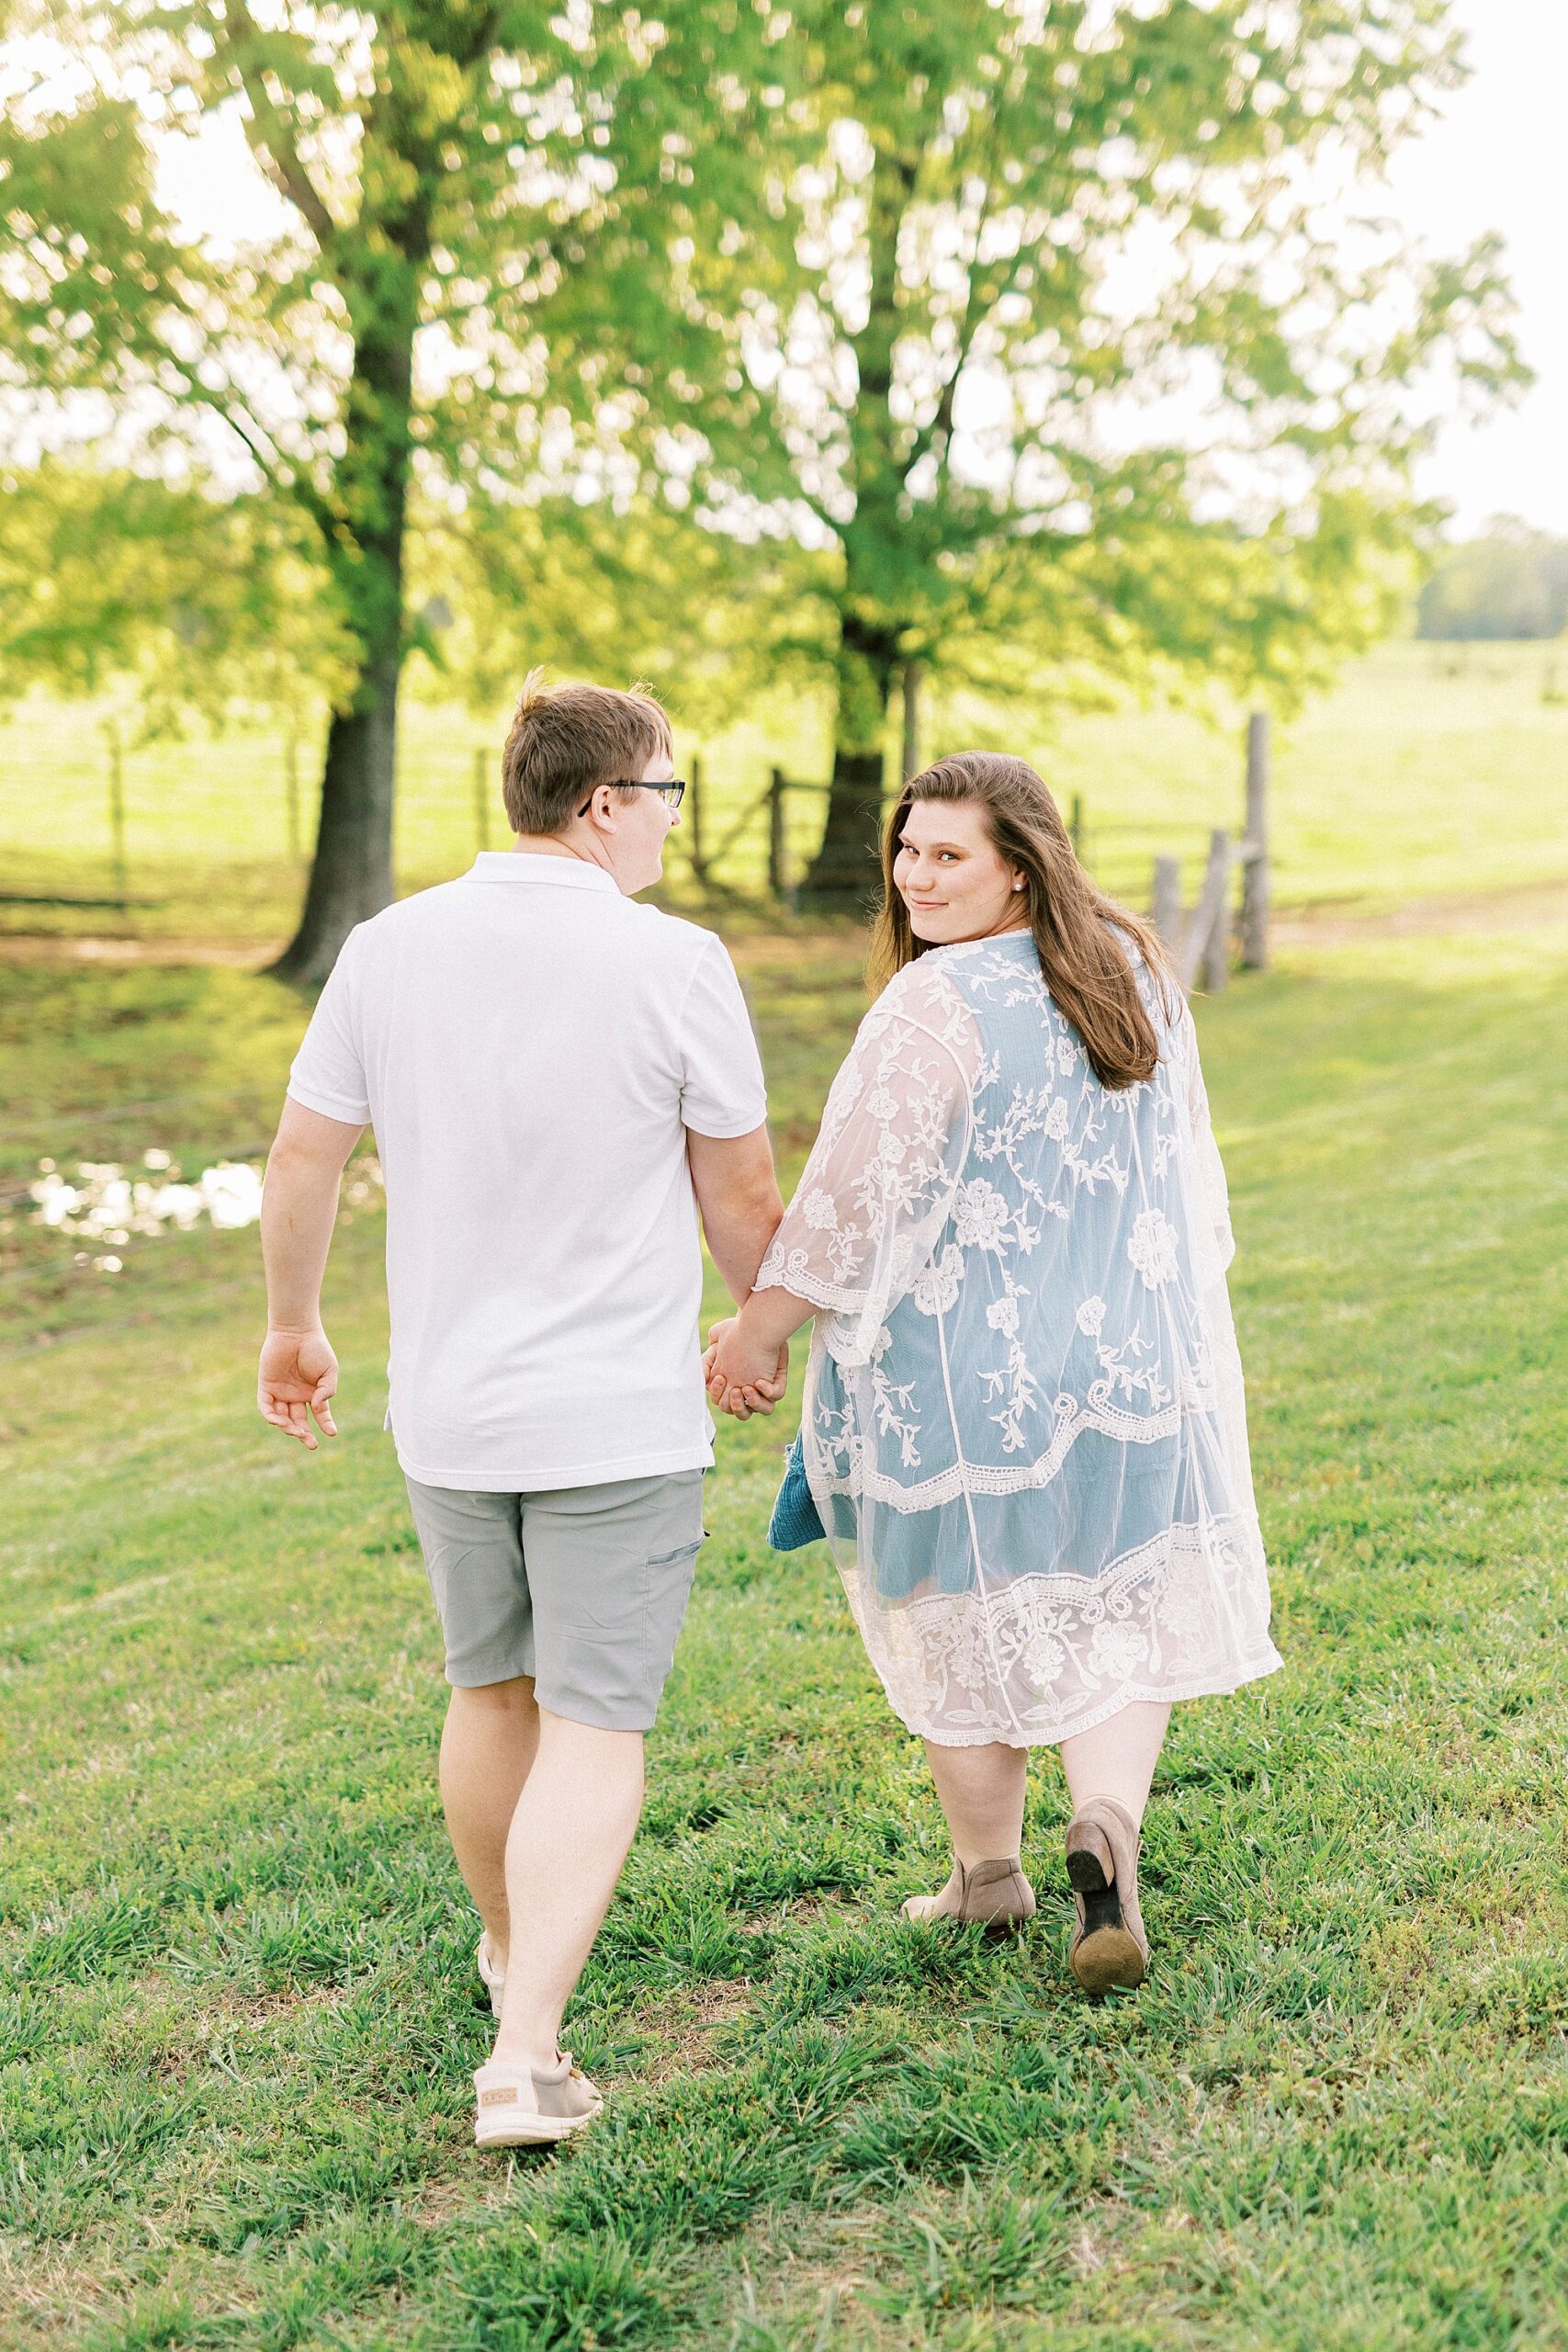 woman in blue dress with white wrap looks over shoulder walking with man across lawn